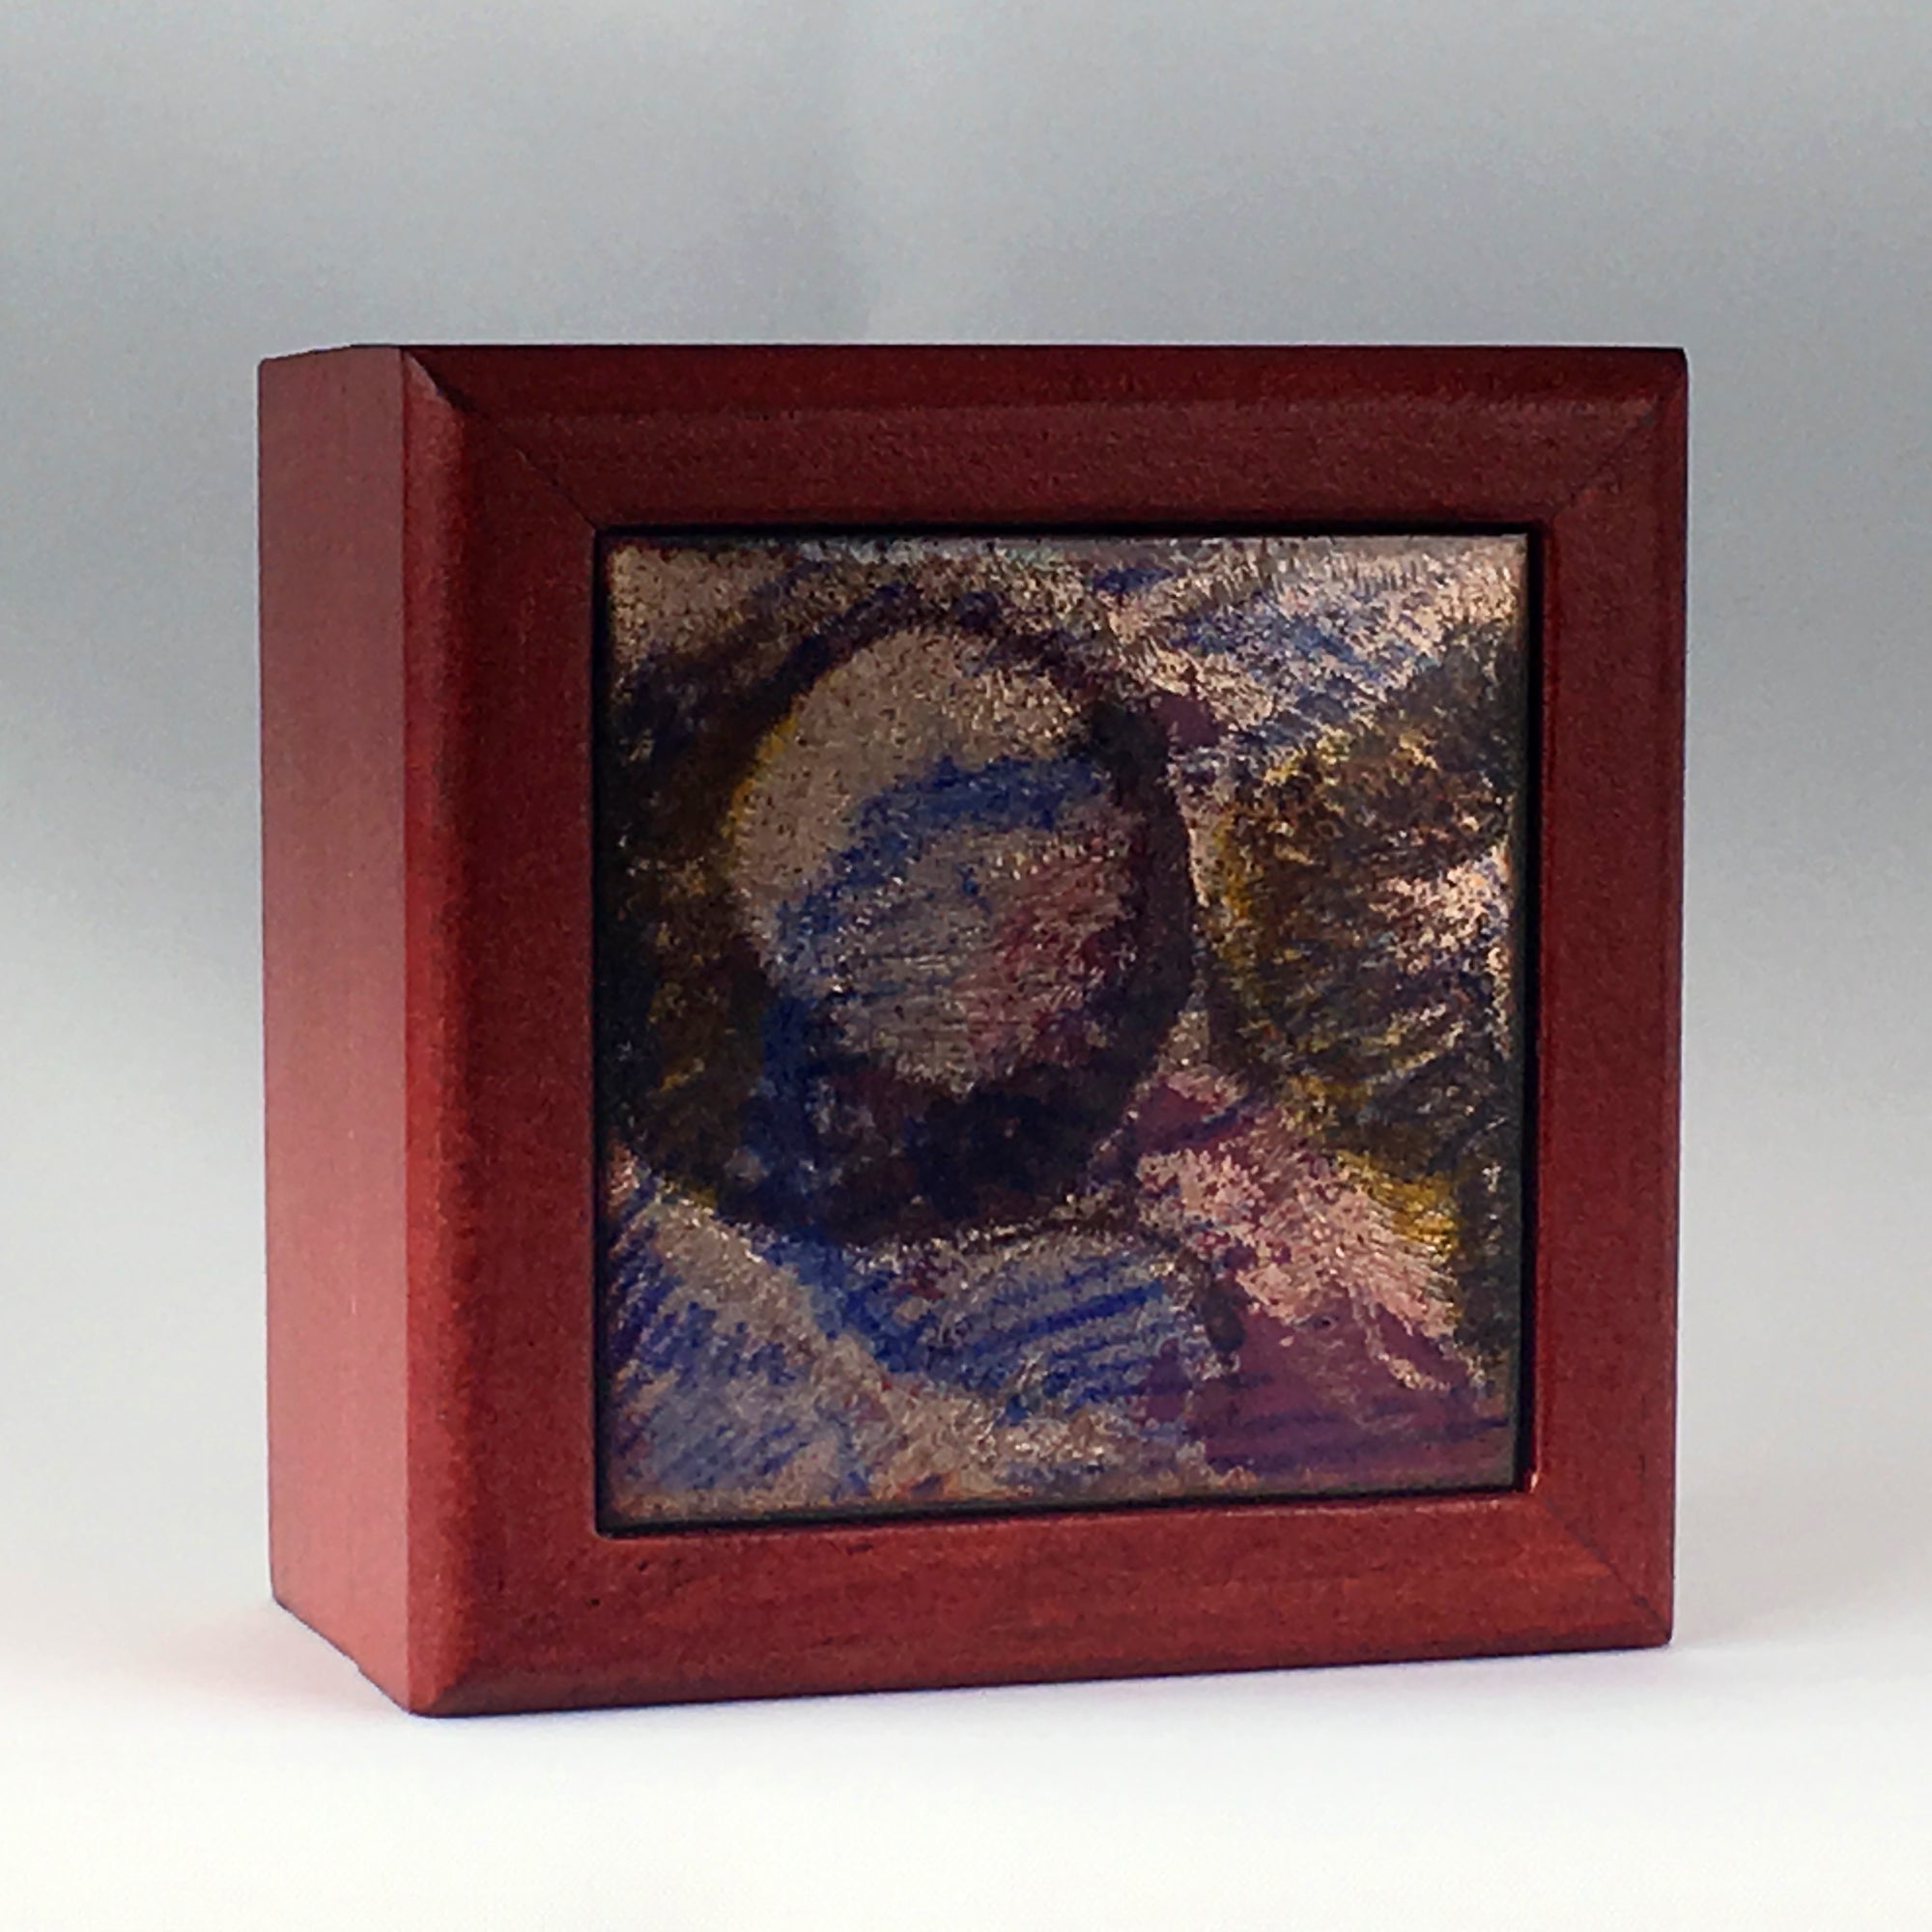 Camille Patton Abstract Circle Vitreous Enamel Inlay in lid of wooden box